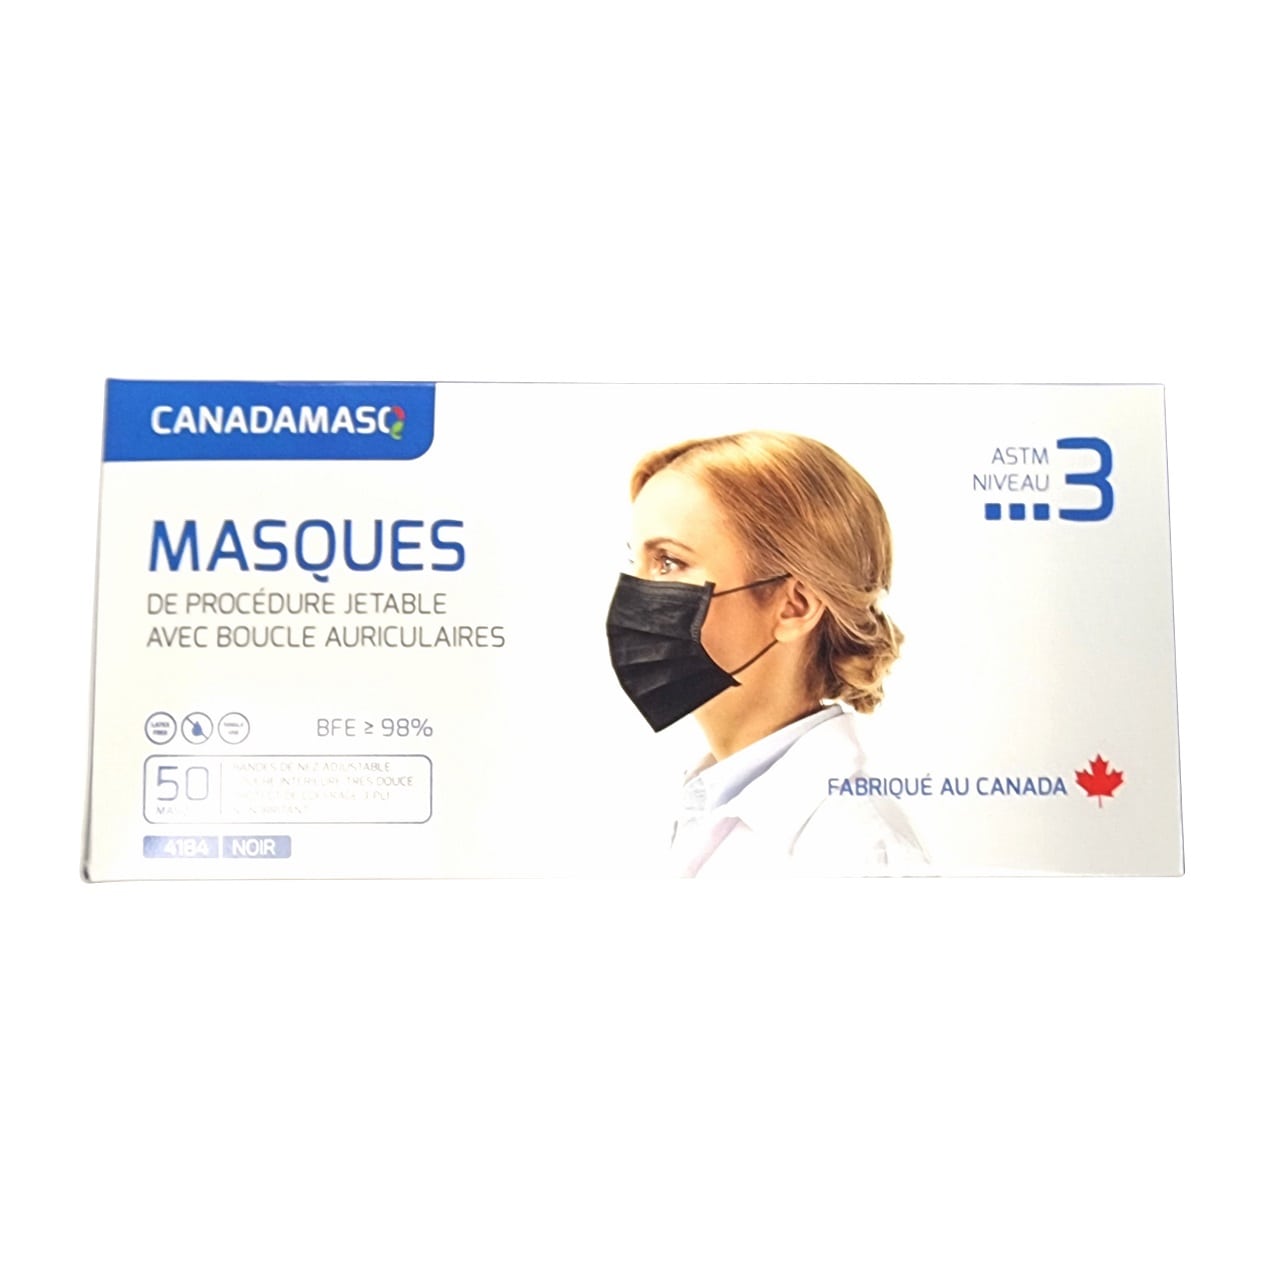 Product label for CANADAMASQ Disposable Medical Masks (ASTM Level 3) Black (50 count) in French